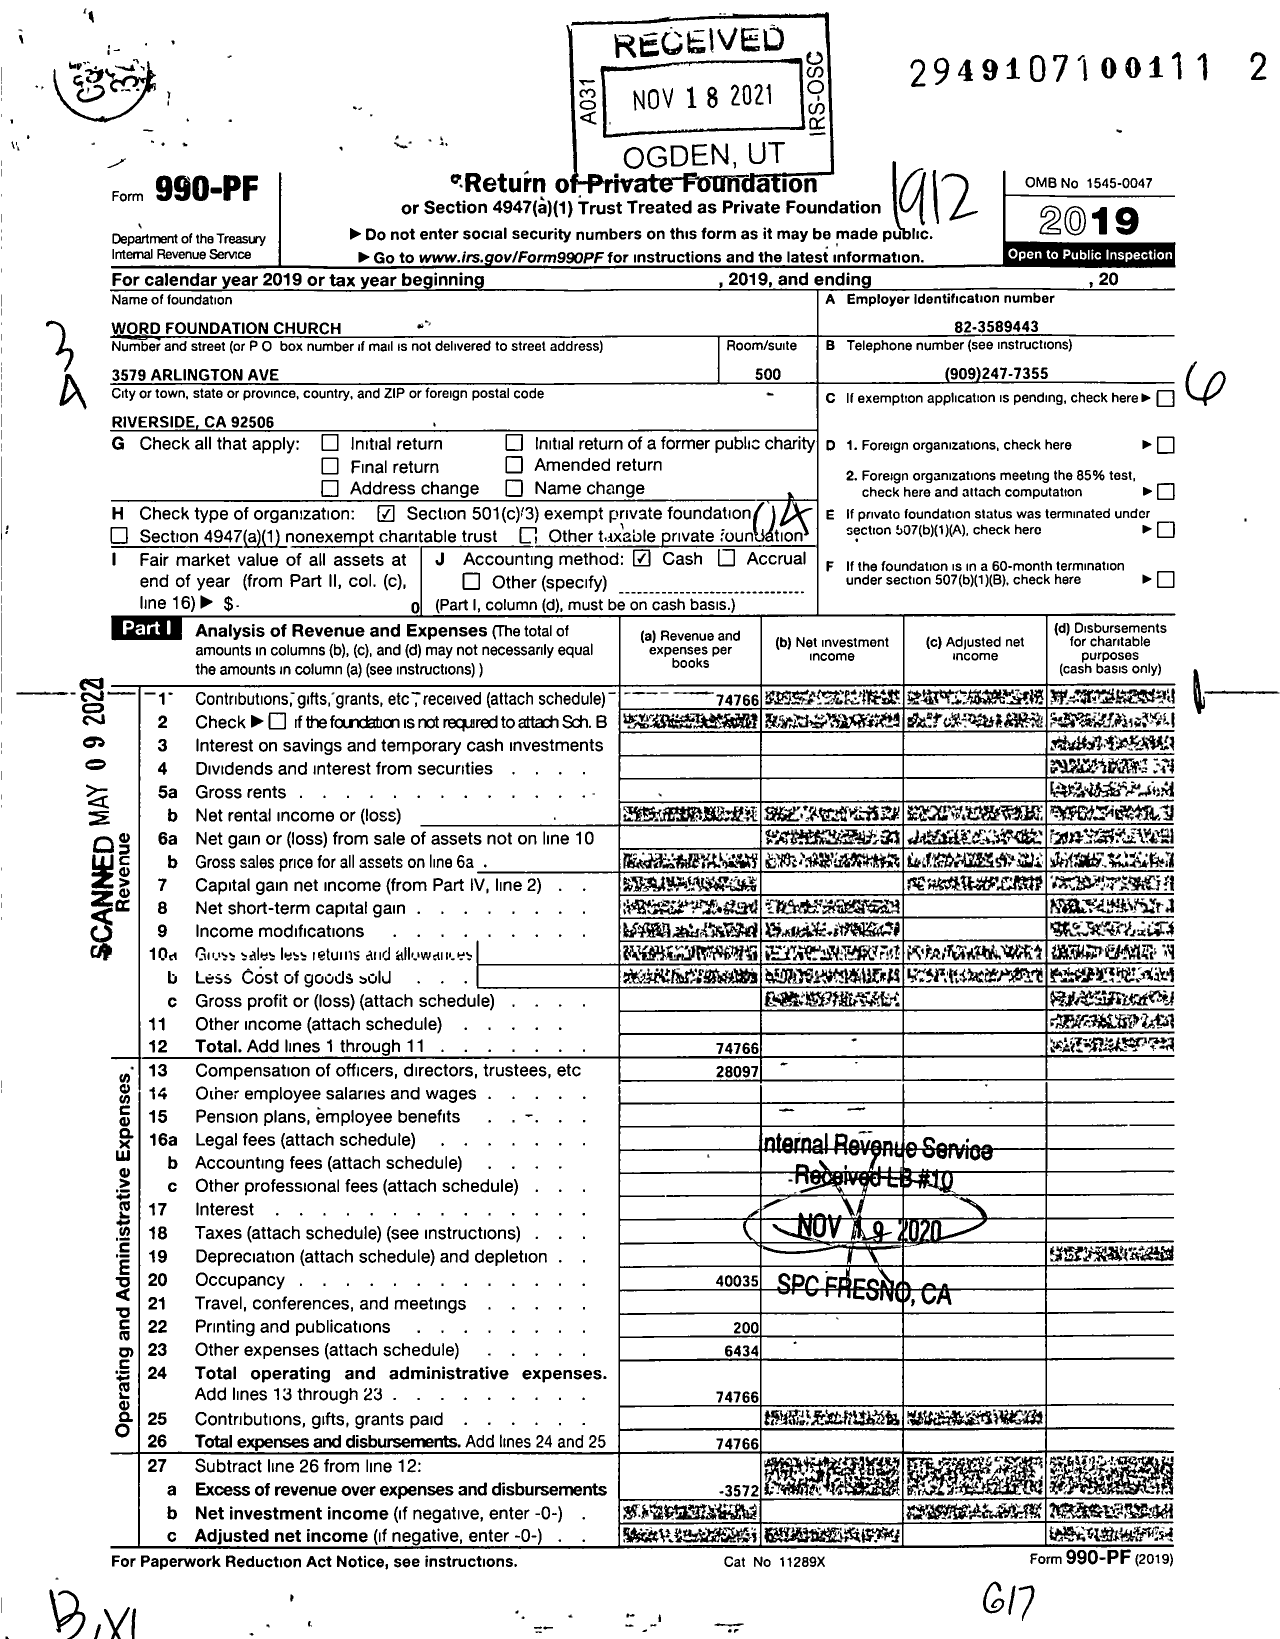 Image of first page of 2019 Form 990PF for Word Foundation Church